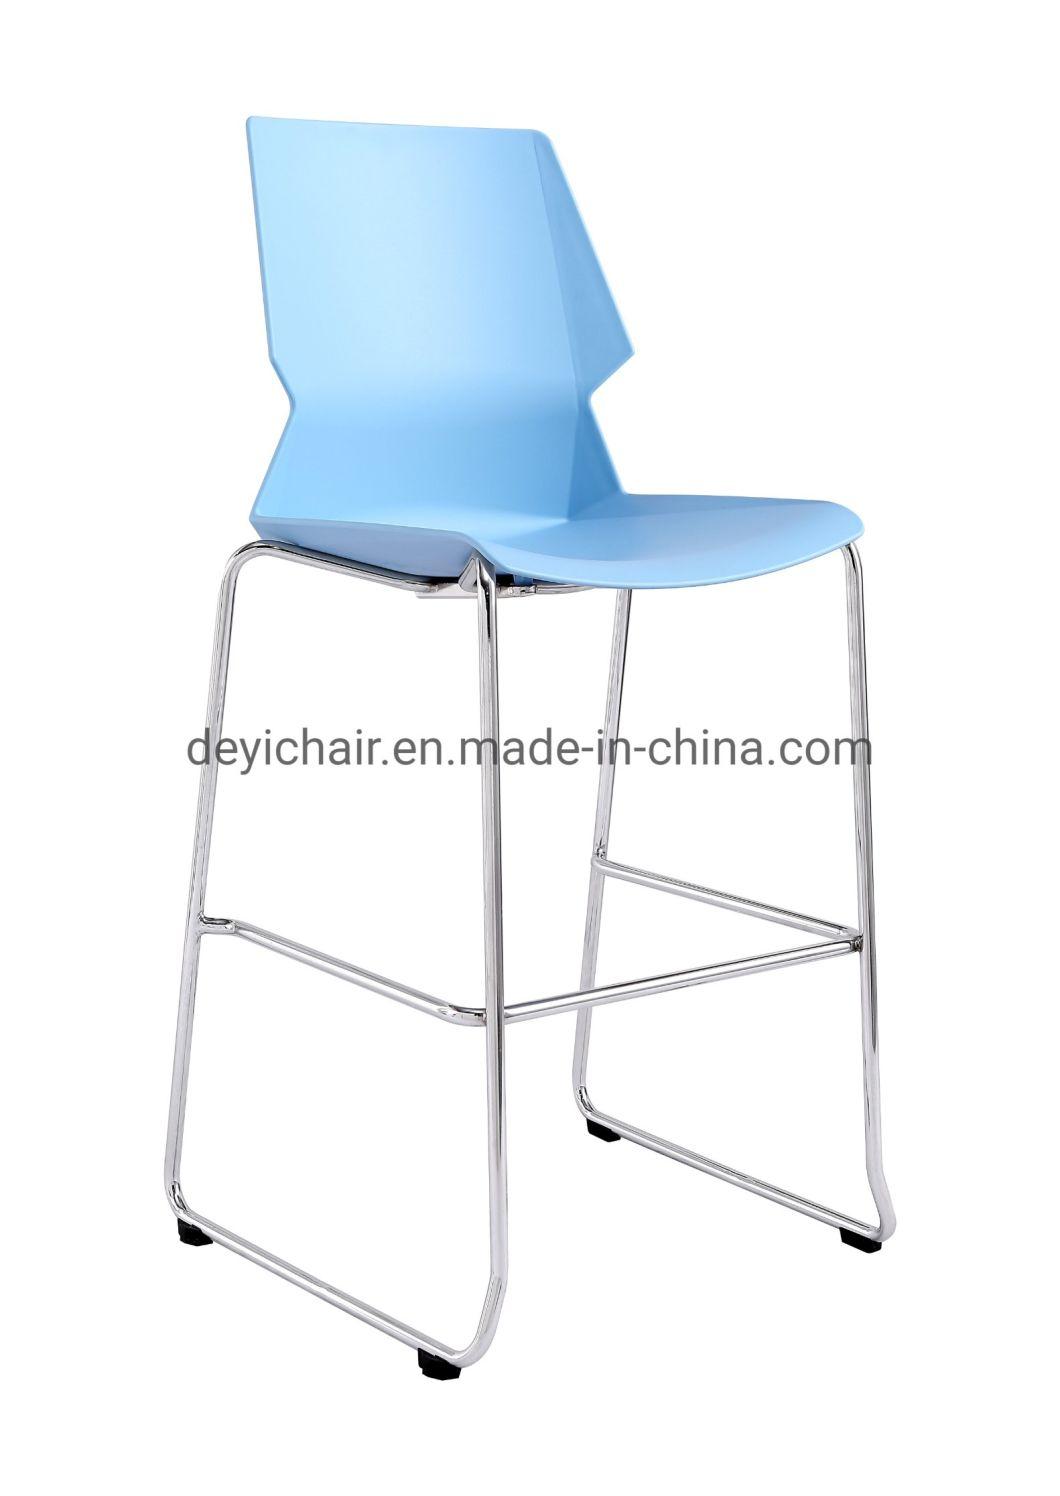 Four Foot Chrome Frame Plastic Back and Seat Cushion Optional Stackable Conference PP Colorful Chair